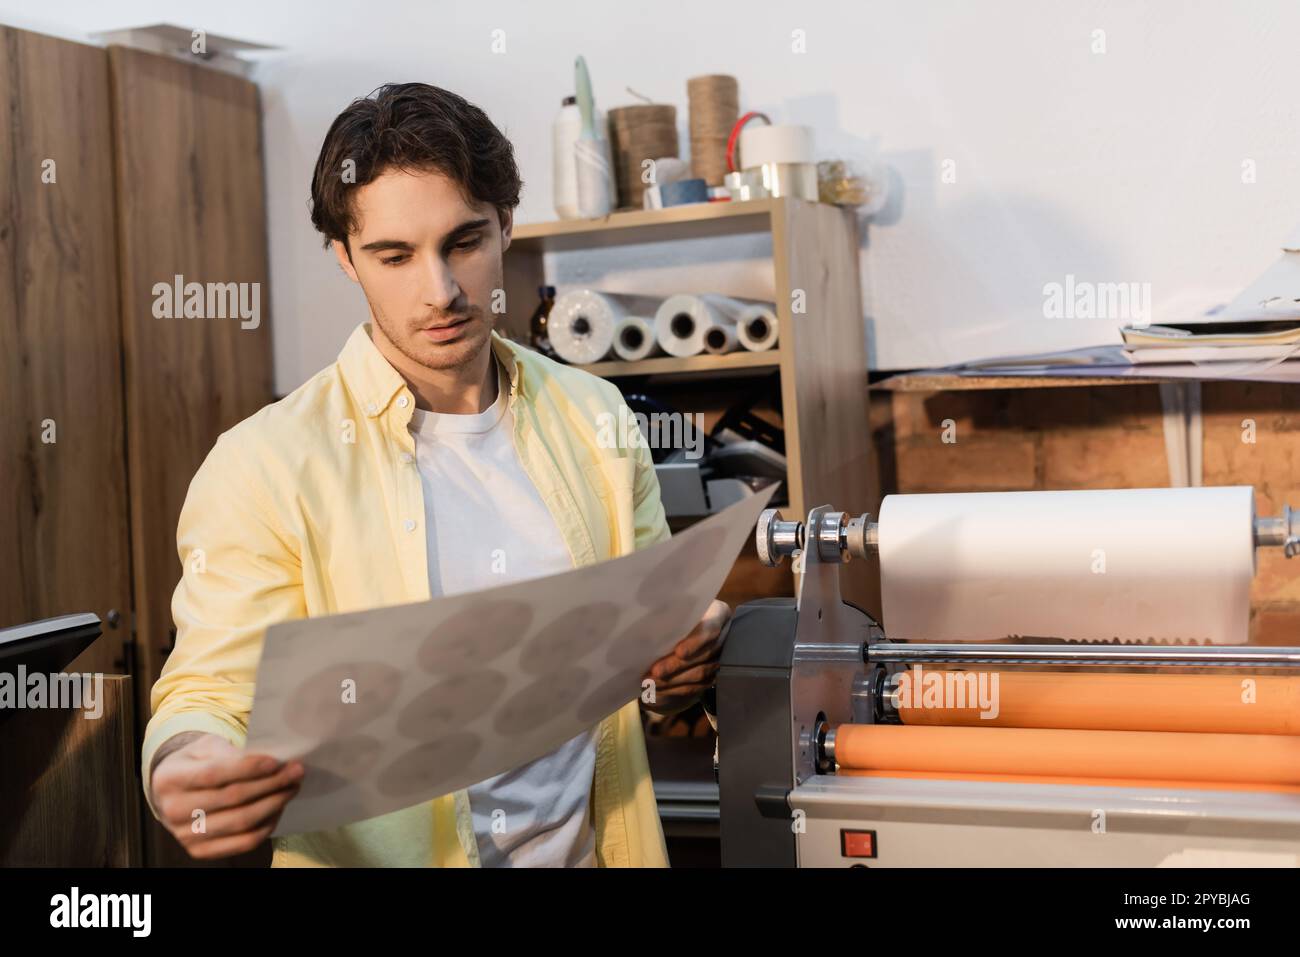 typographer looking at printed paper near professional print plotter,stock image Stock Photo